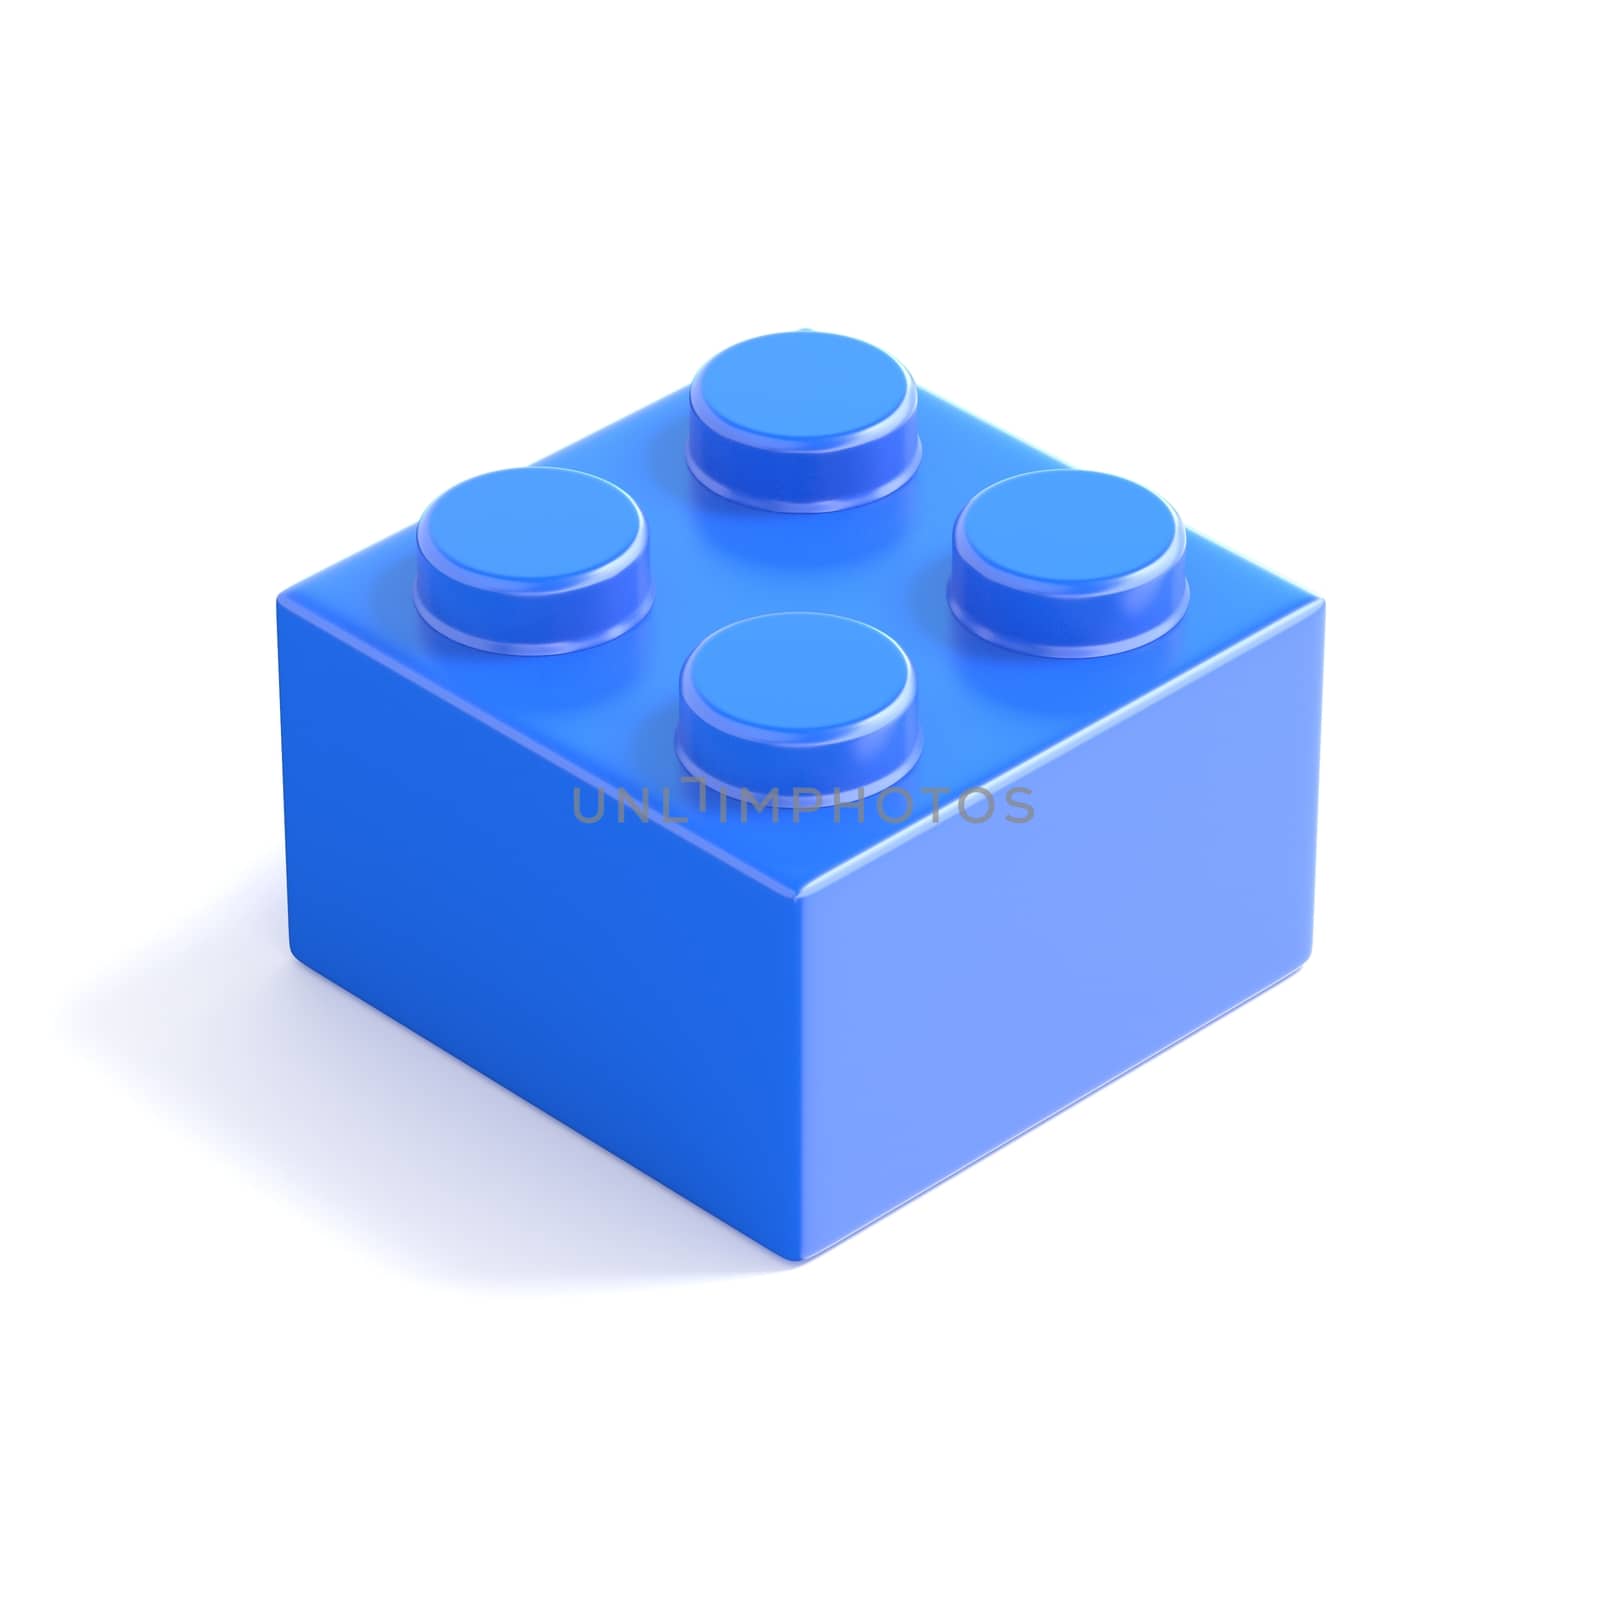 Blue plastic building block, children toy. Top view. 3D render illustration isolated on white background